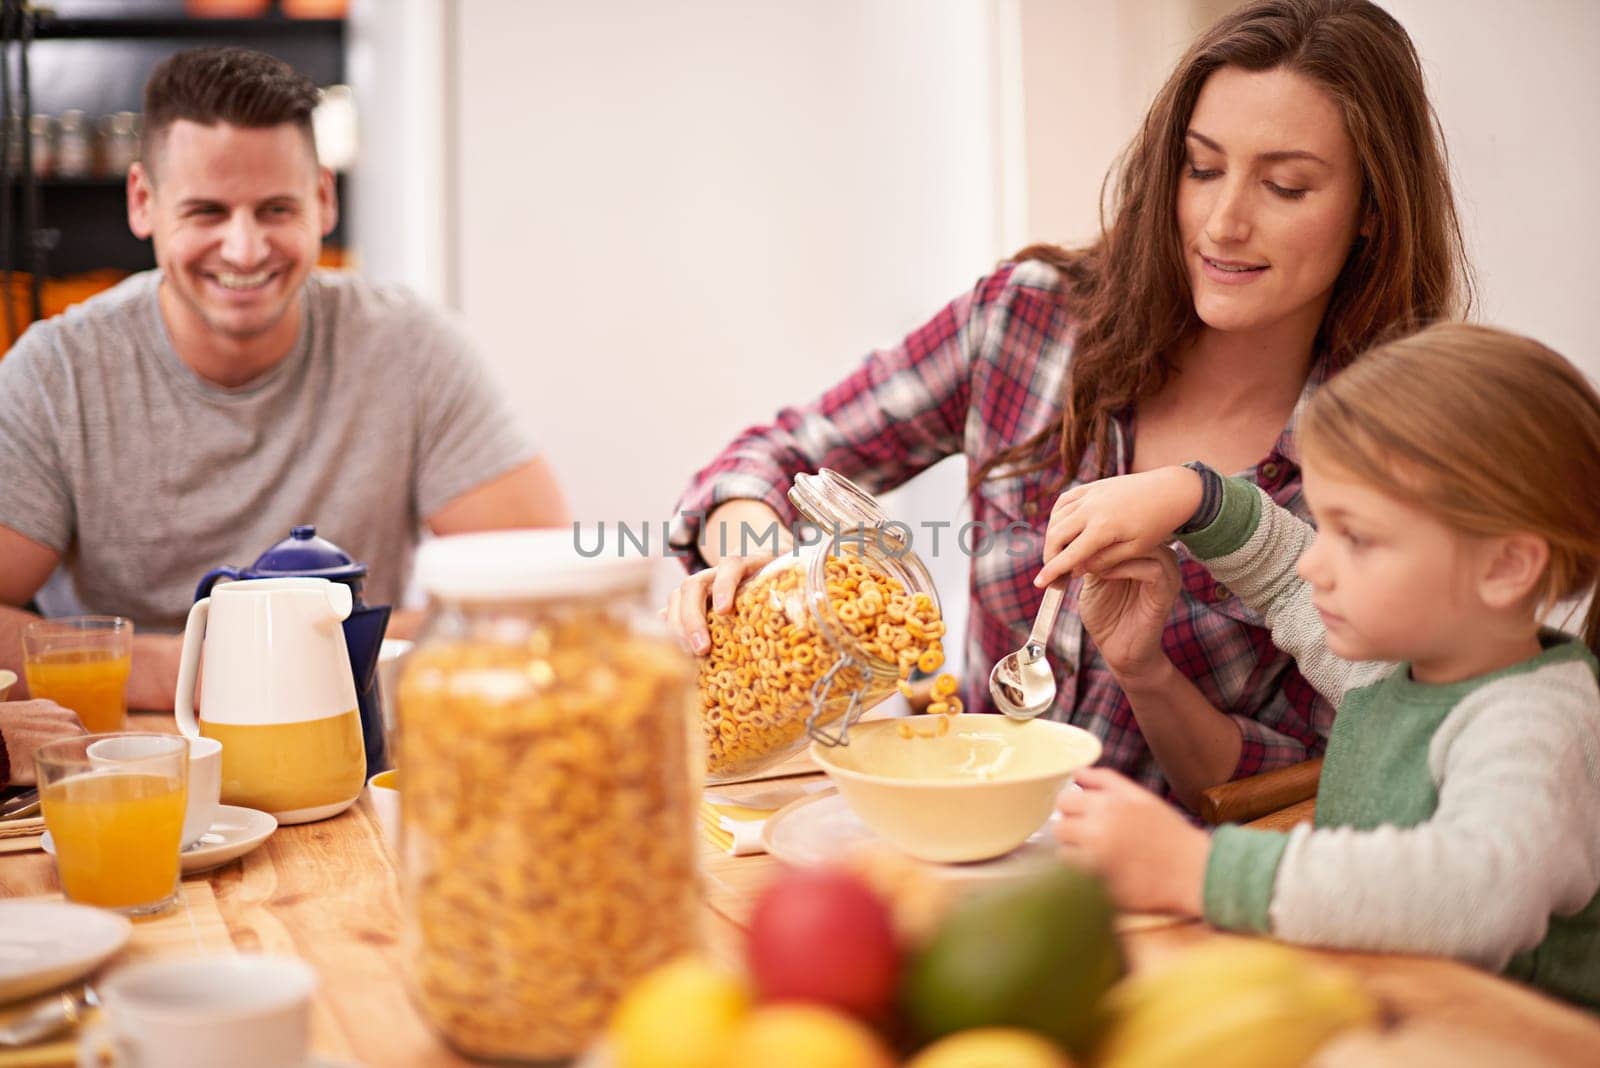 Mother, girl and breakfast with help for cereal, nutrition and health by table in house. Woman, kid and brunch together in home with dad by kitchen for wellness, eating and assistance with food.